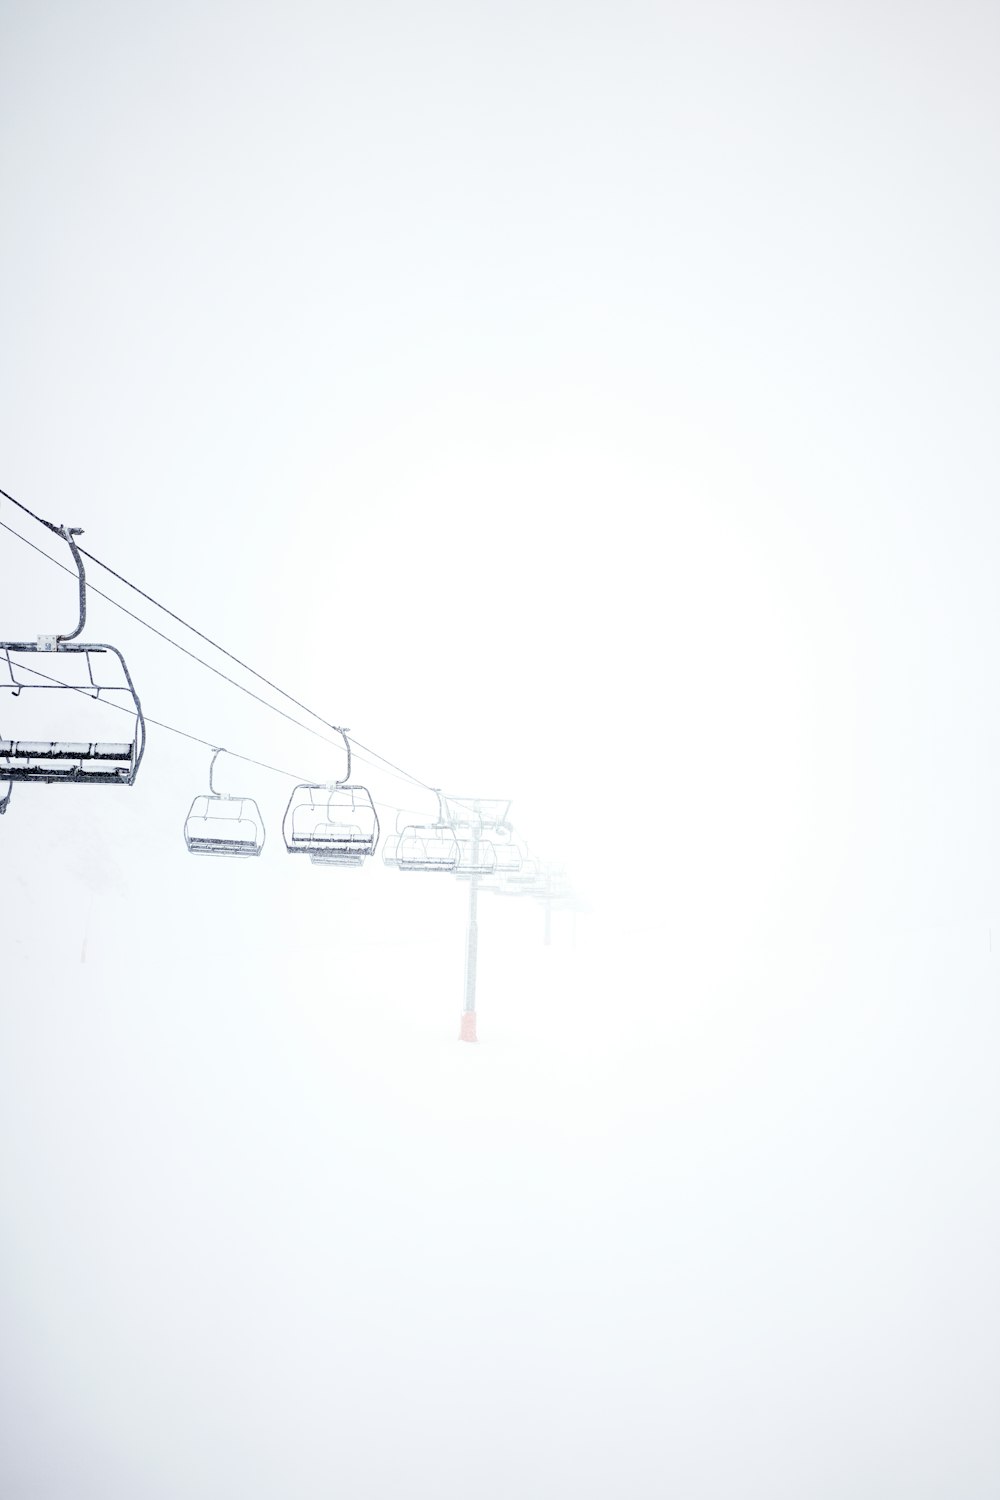 a ski lift going up a hill in the snow